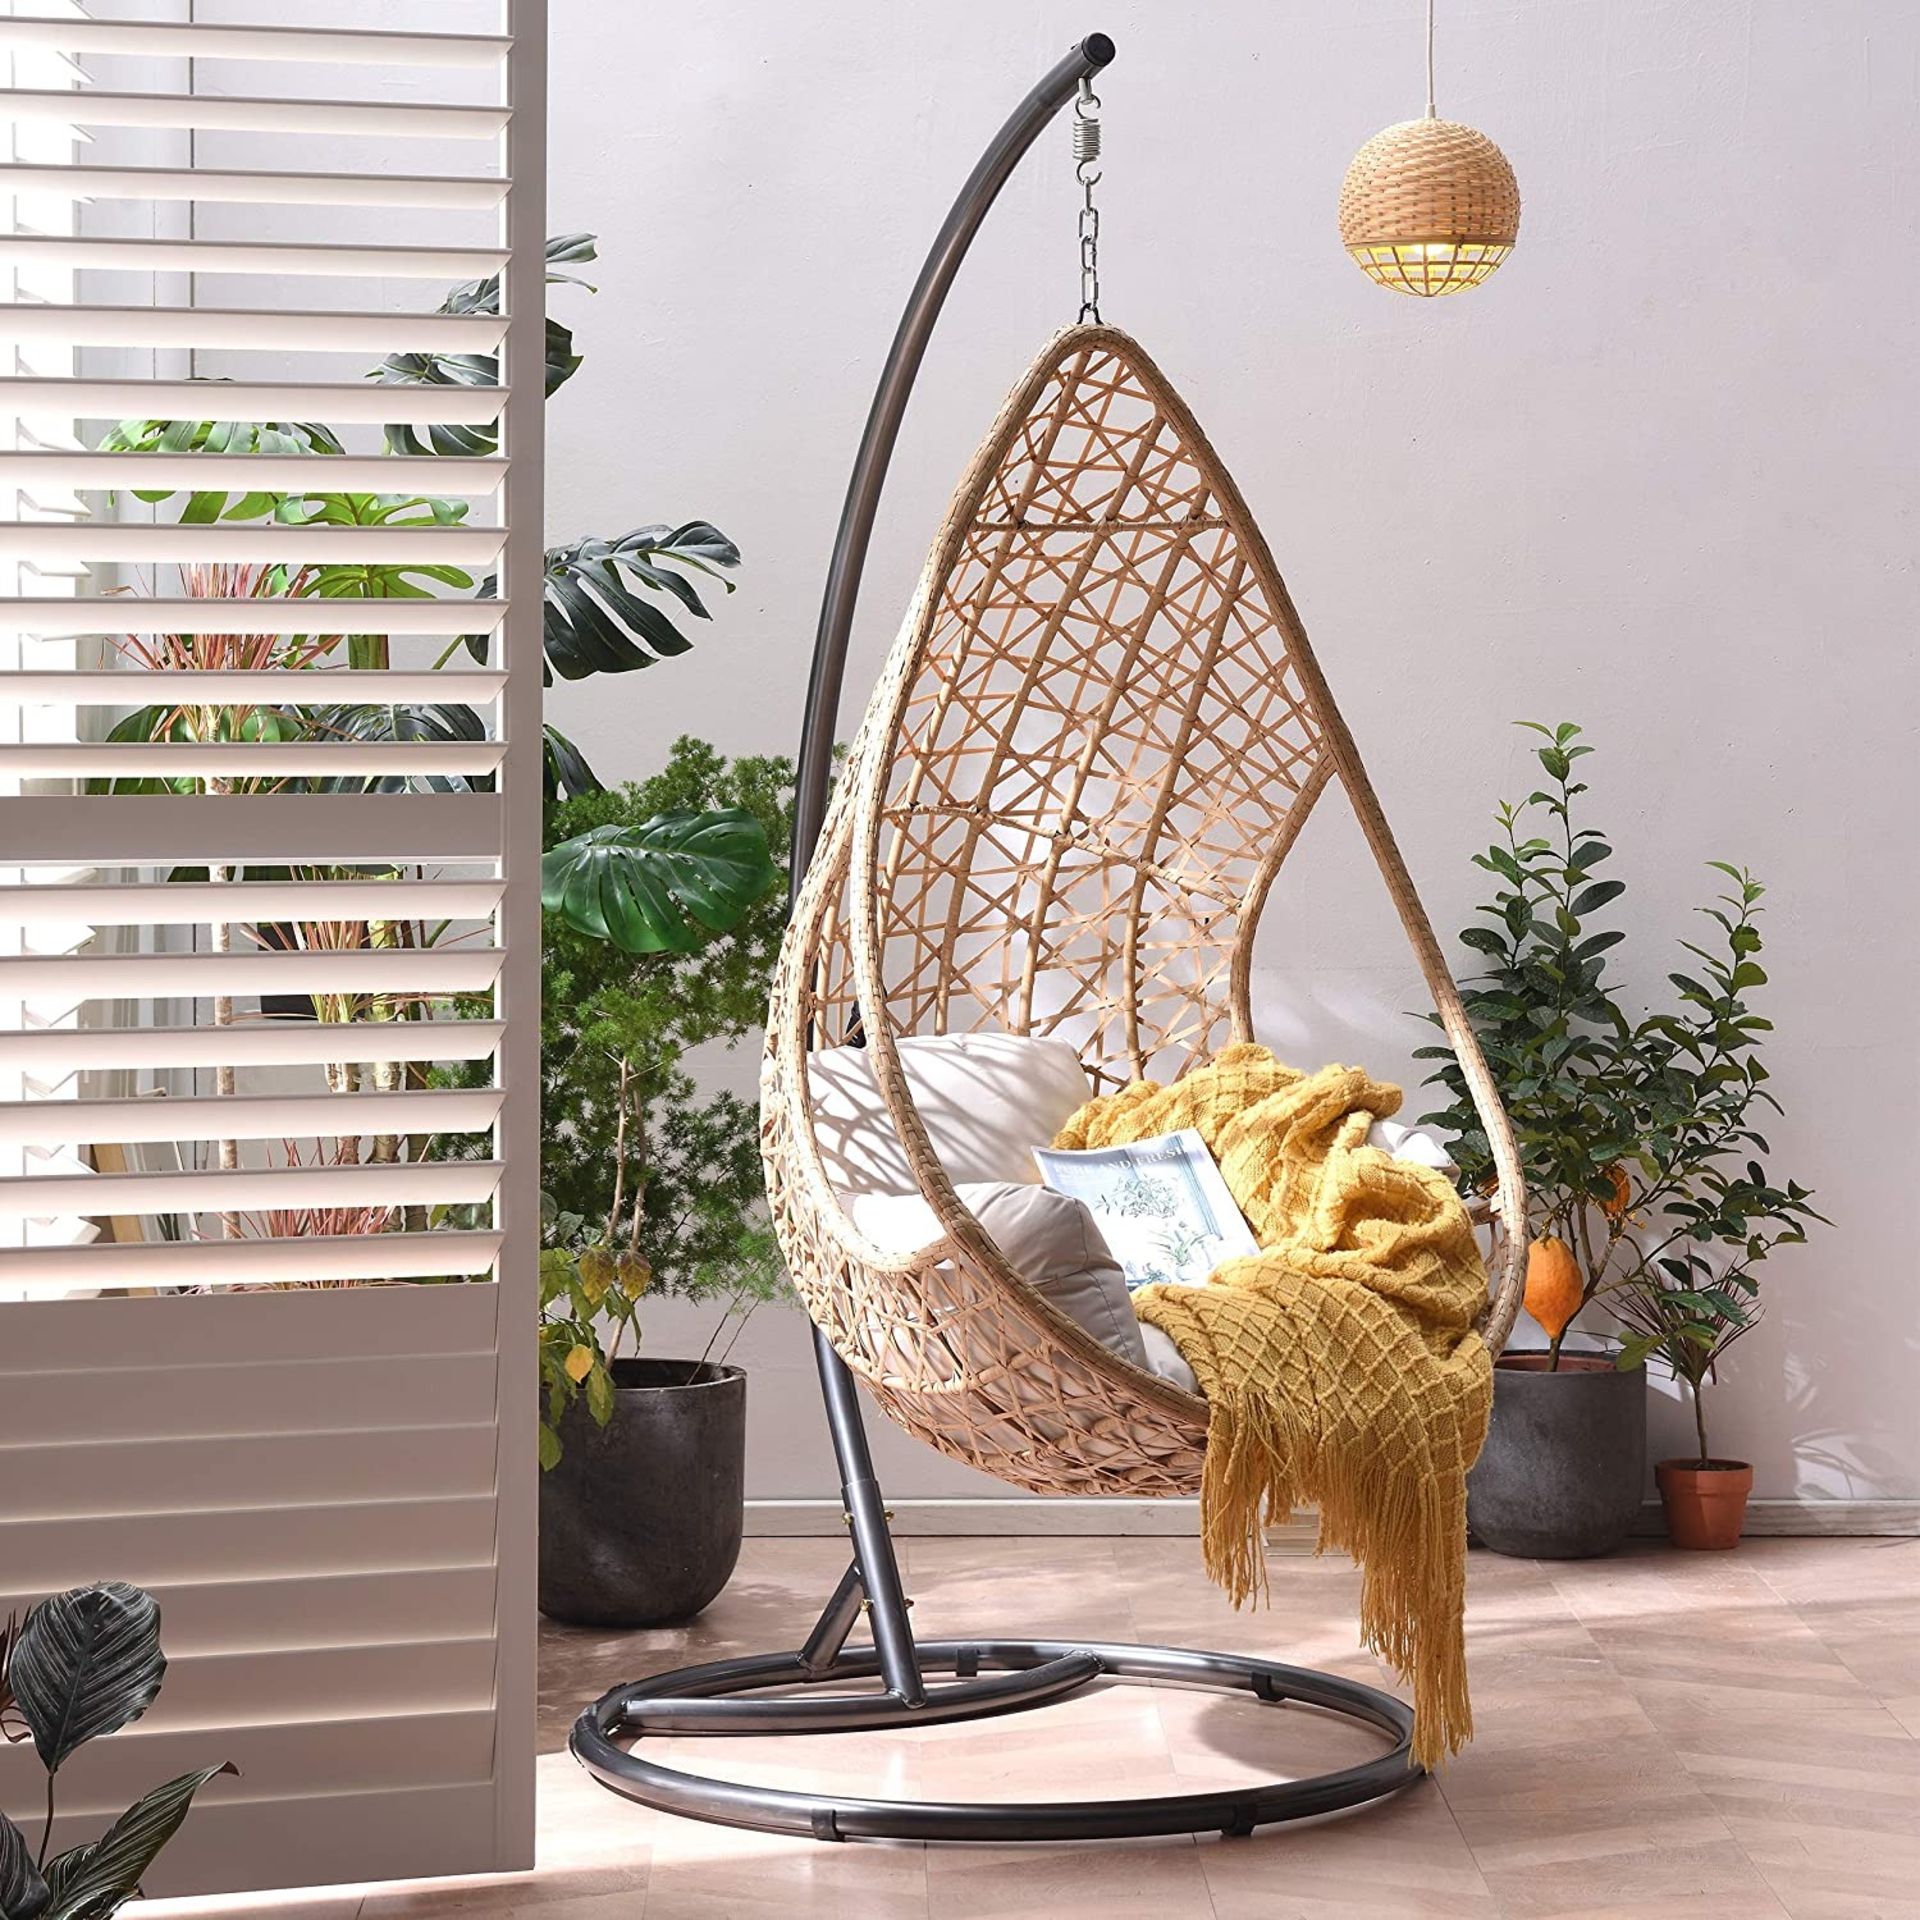 Indra Rattan Hanging Egg Chair Stand (R31) RRP £129.99 - Egg chair sold separately